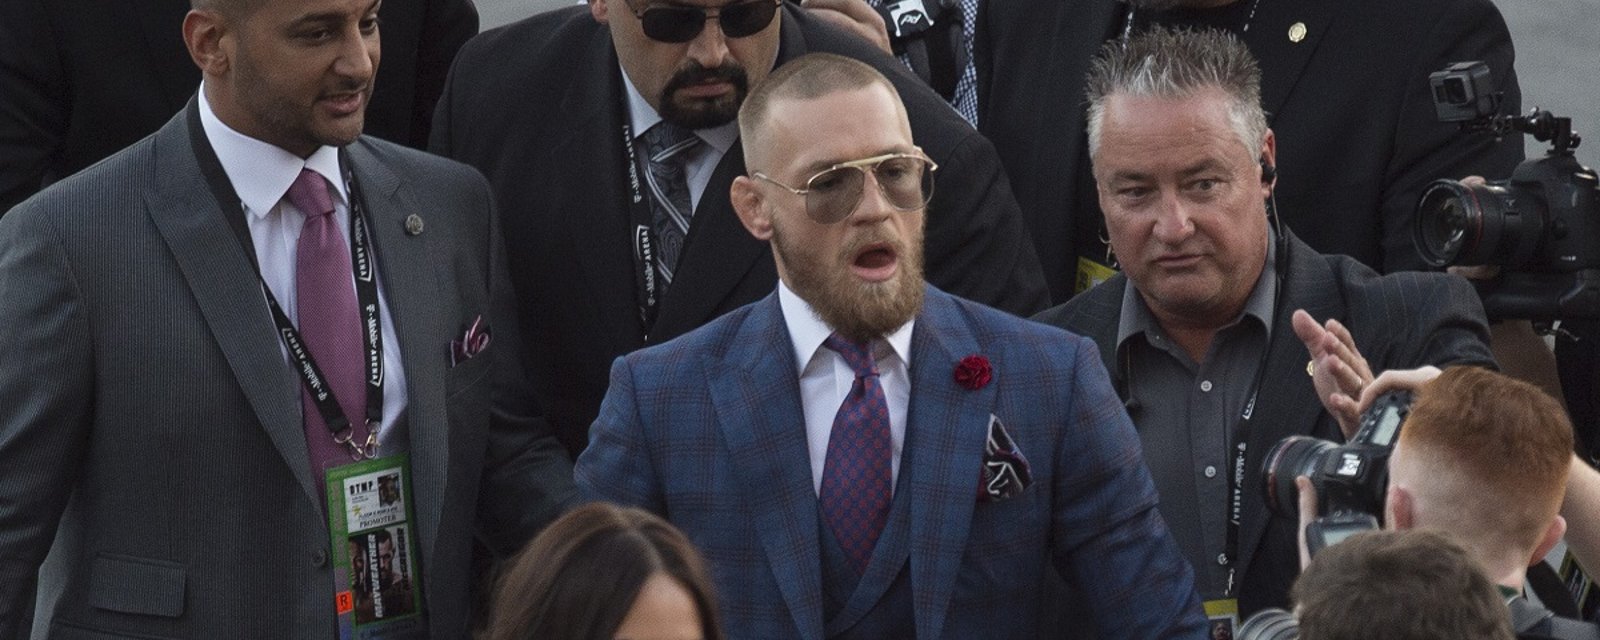 UFC star Conor McGregor arrested for 'attempted sexual assault'.